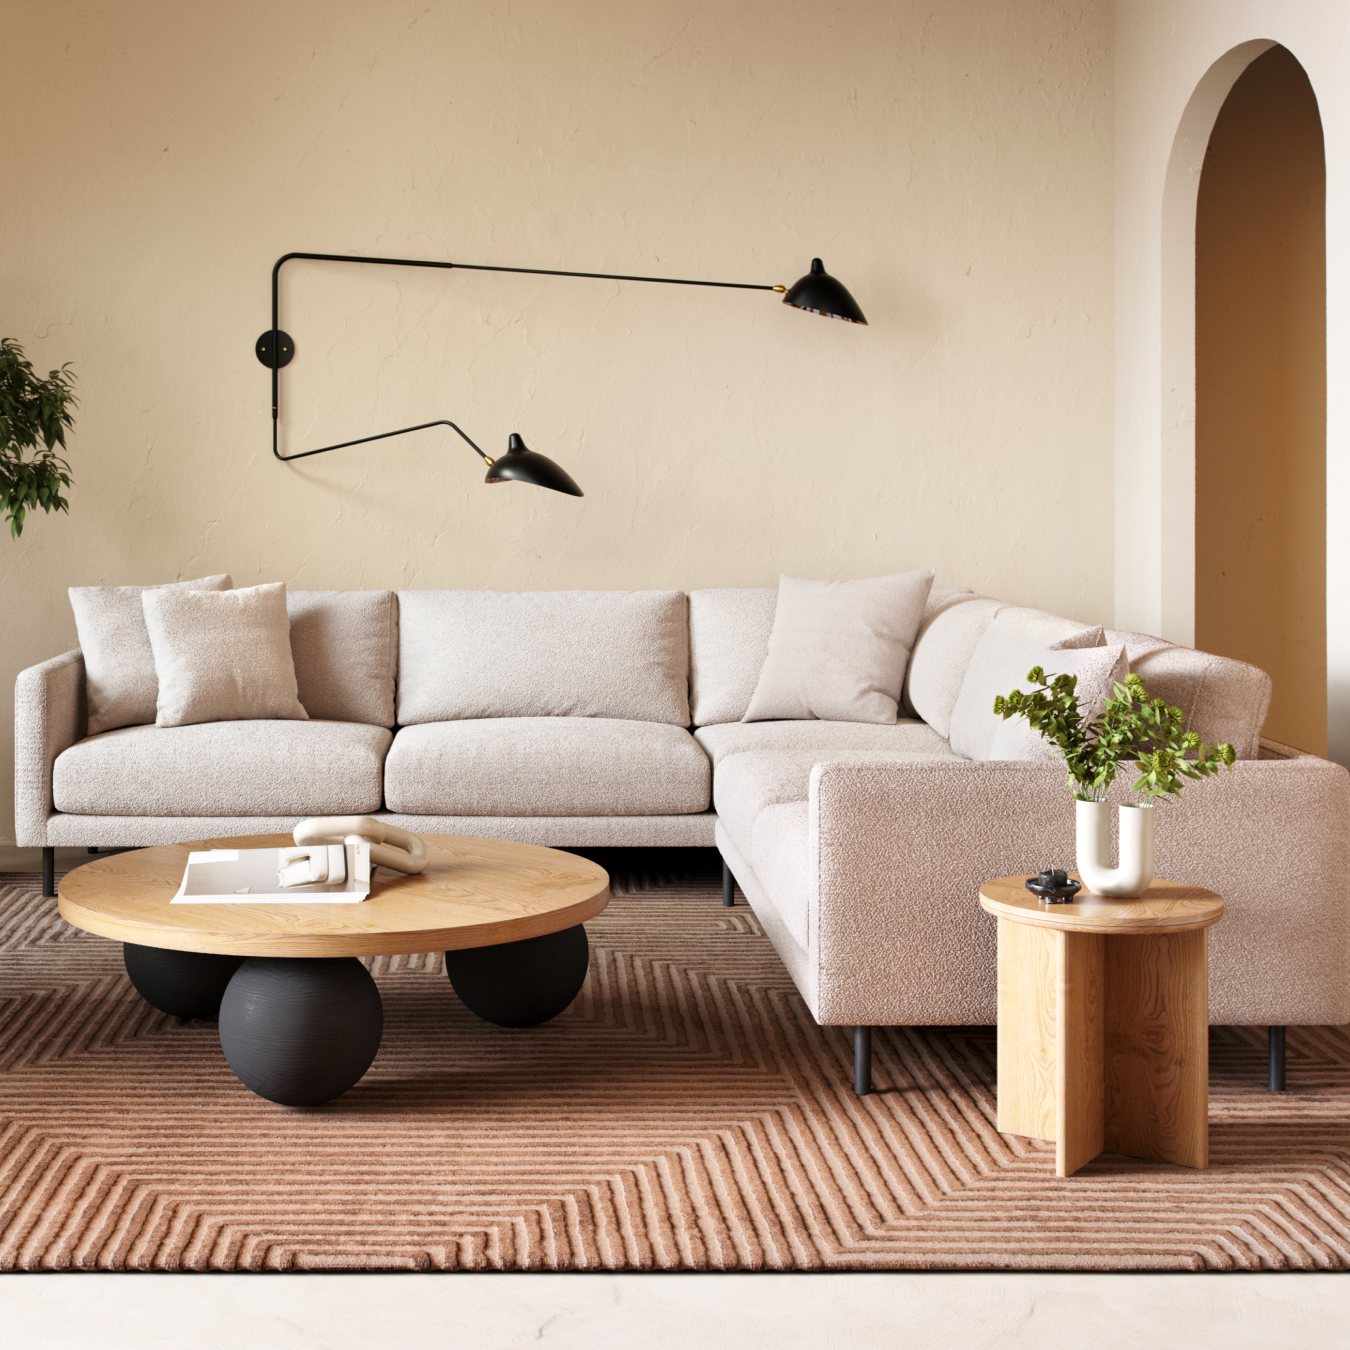 Modern white modular sofa and round timber coffee table in stylish living space